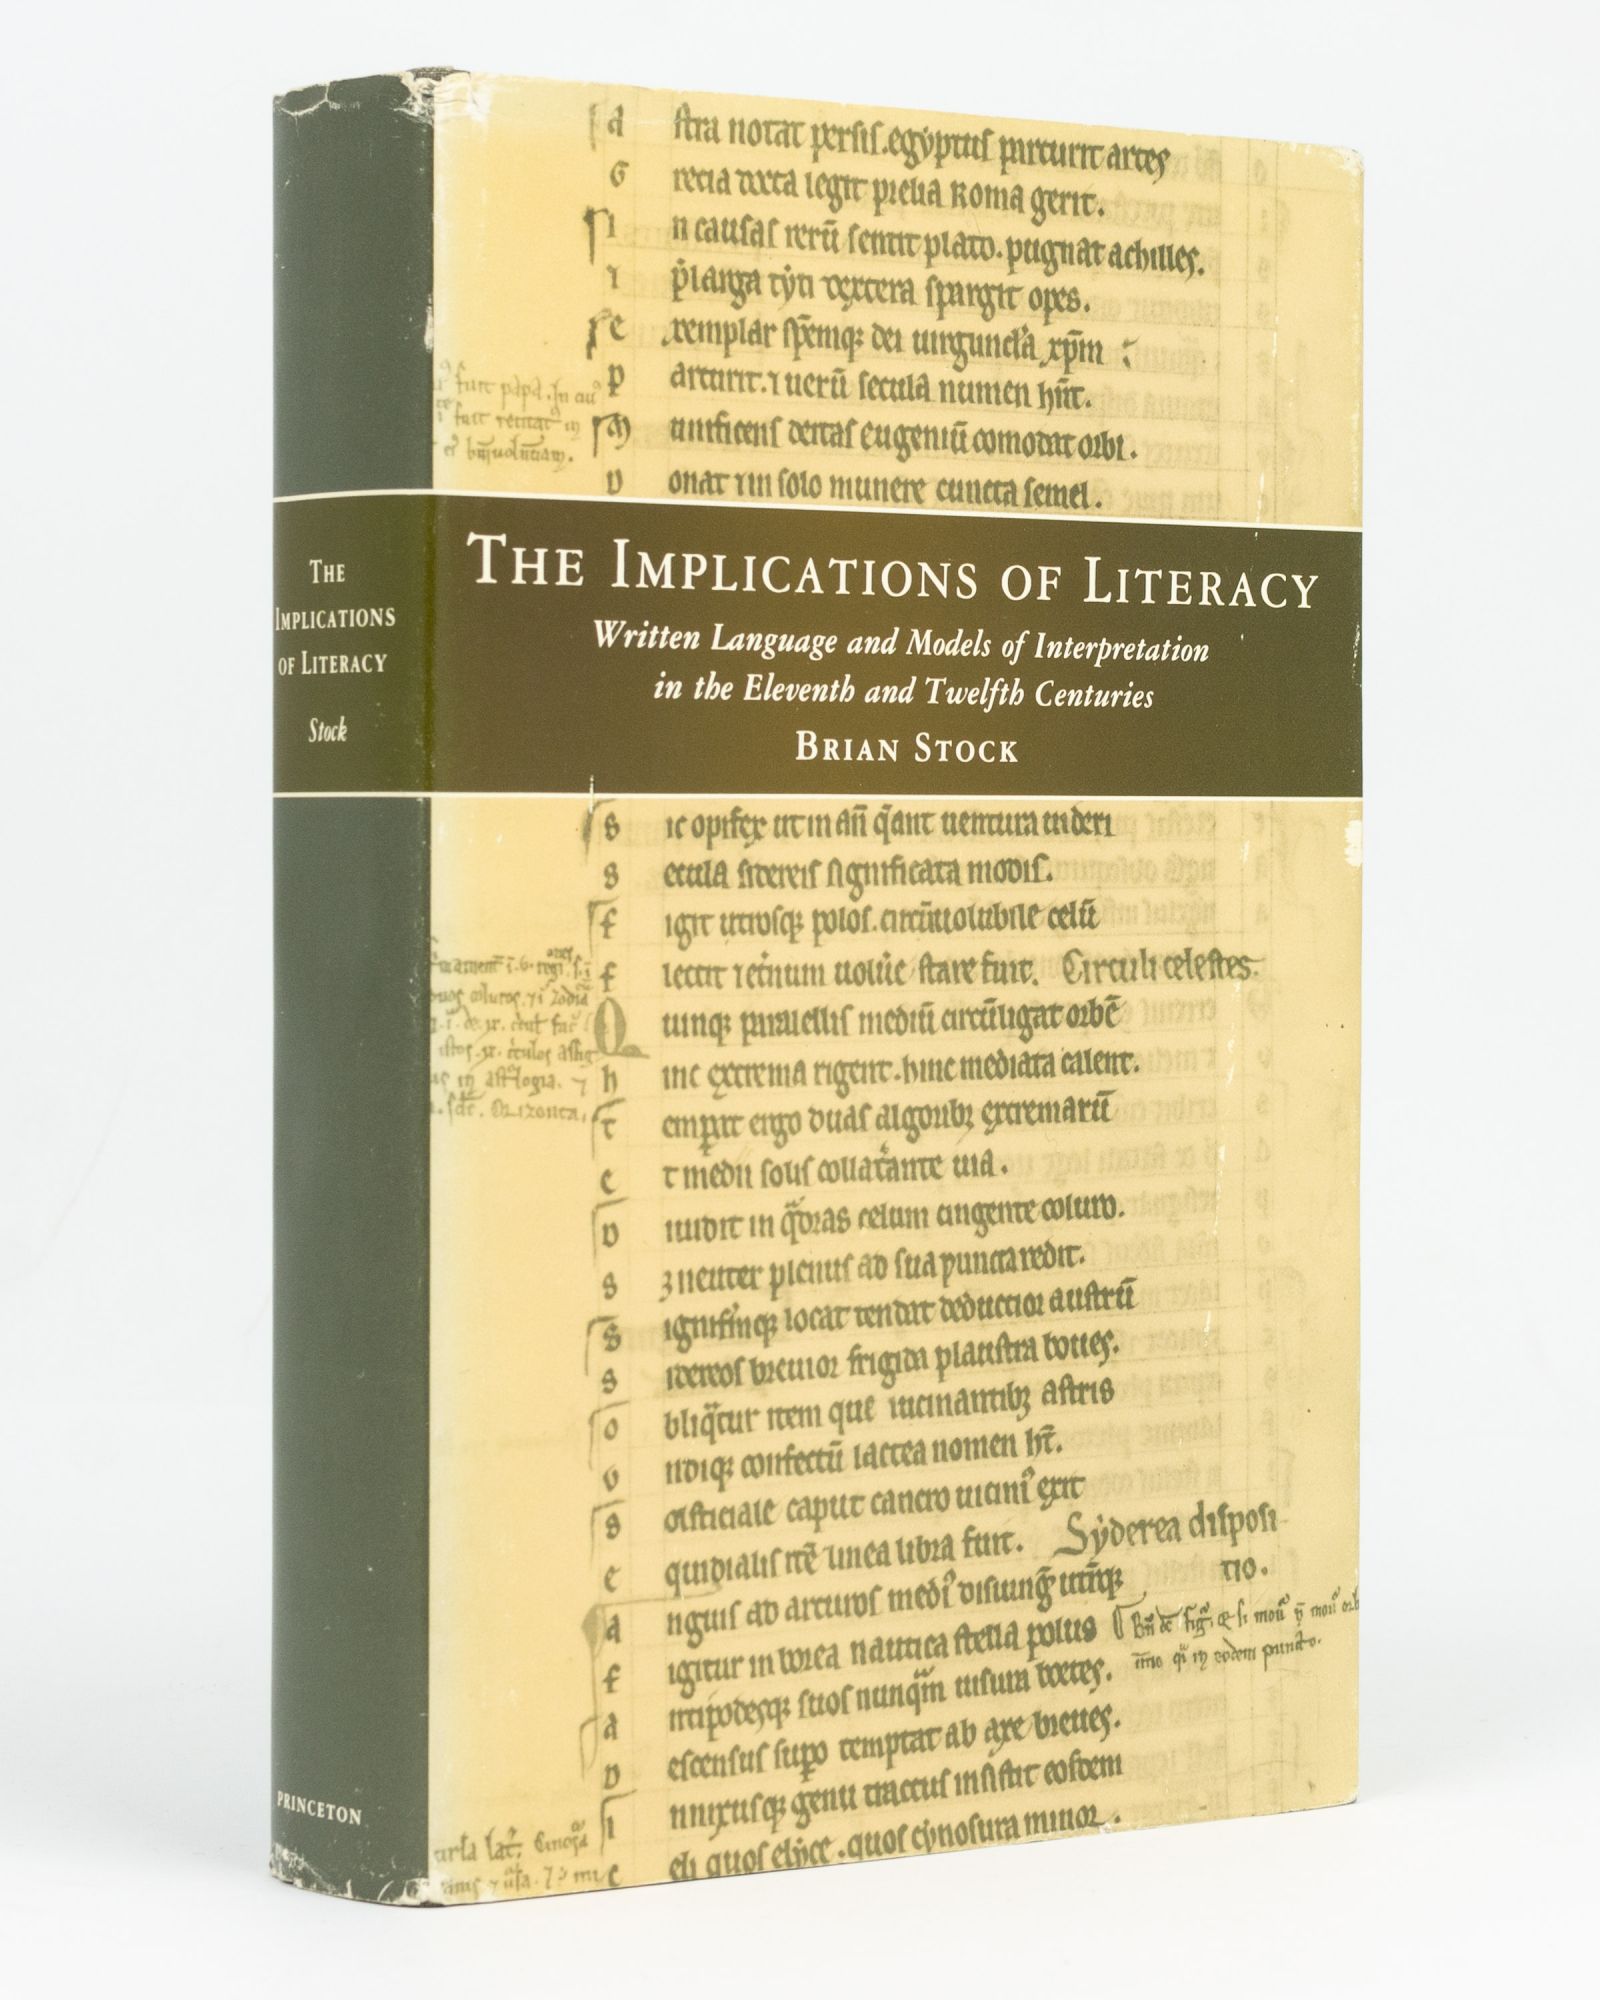 The Implications of Literacy. Written Language and Models of Interpretation in the Eleventh and Twelfth Centuries - STOCK, Brian